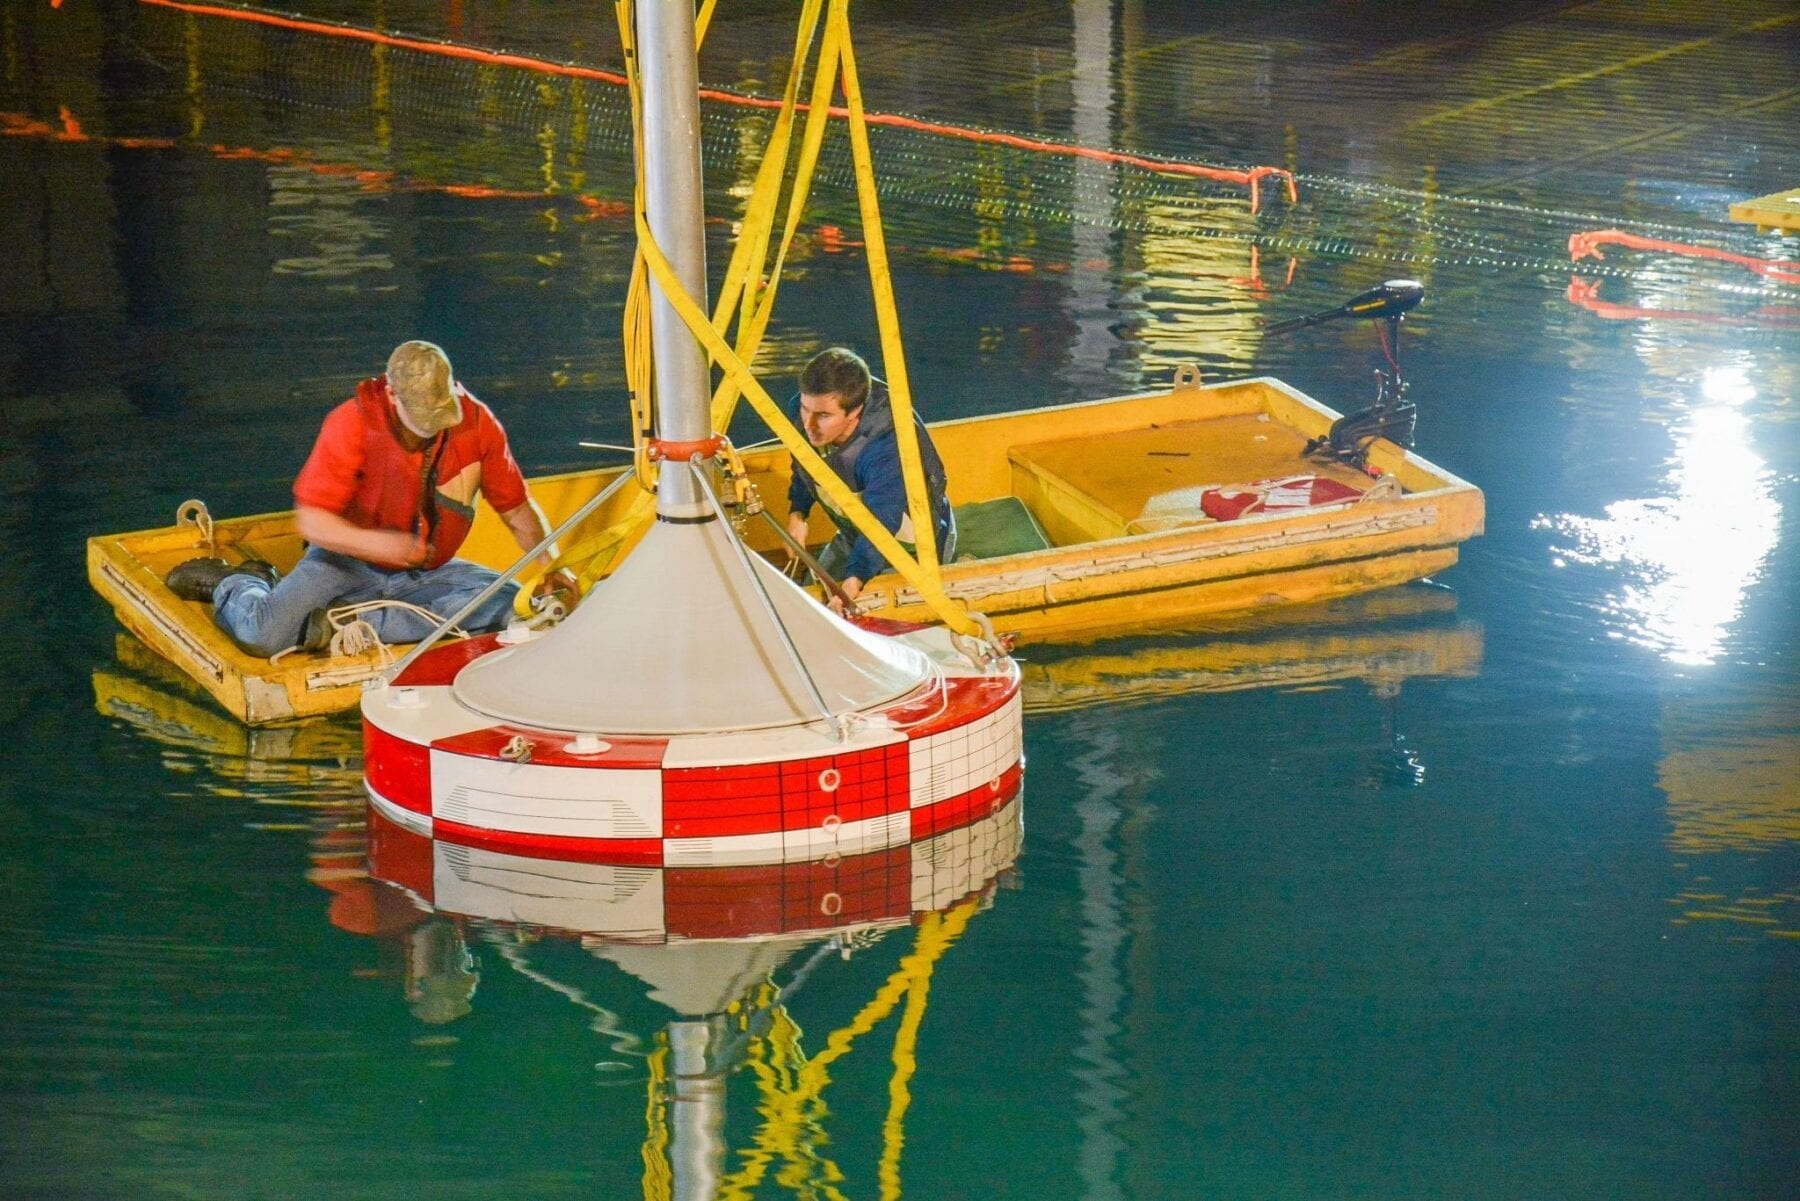 Wave energy researchers dive deep to advance clean energy source